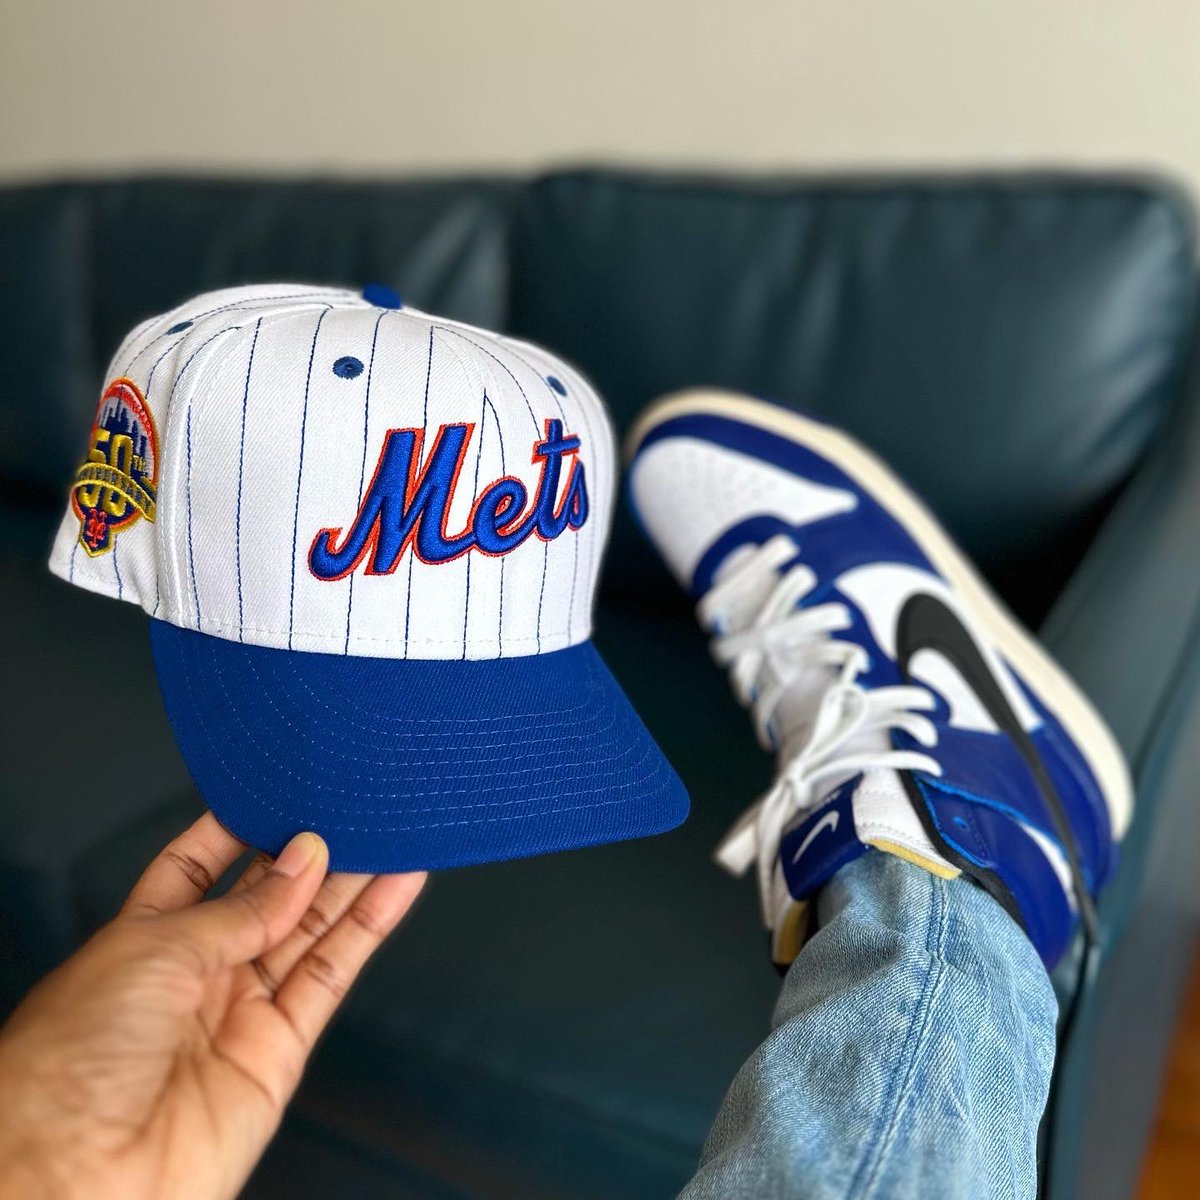 I have a few dunk highs but these are my favorite, Nike Dunk High Ambush Deep Royal x Hat Club Pinstripes Pack Mets.

#KOTD
#FOTD
#snkrsliveheatingup